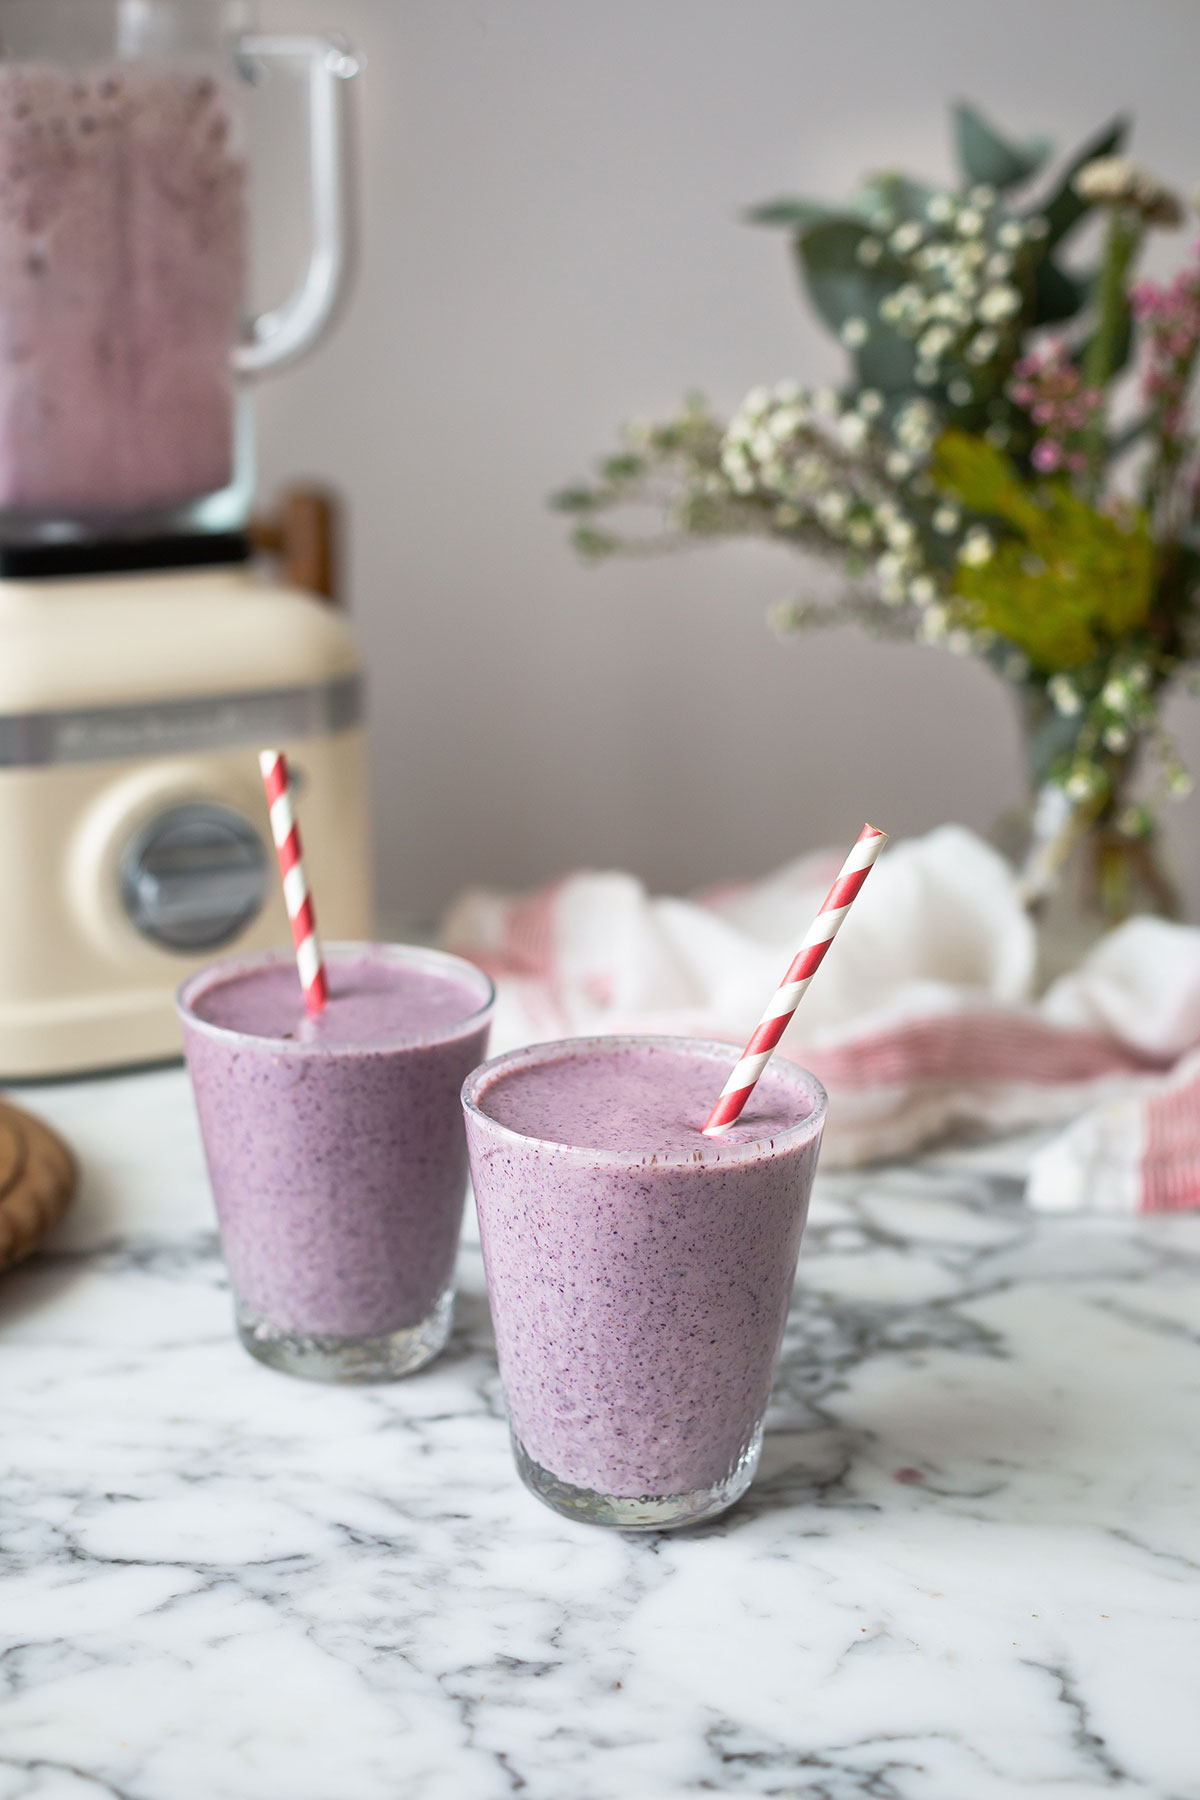 Two healthy blueberry & banana protein smoothies